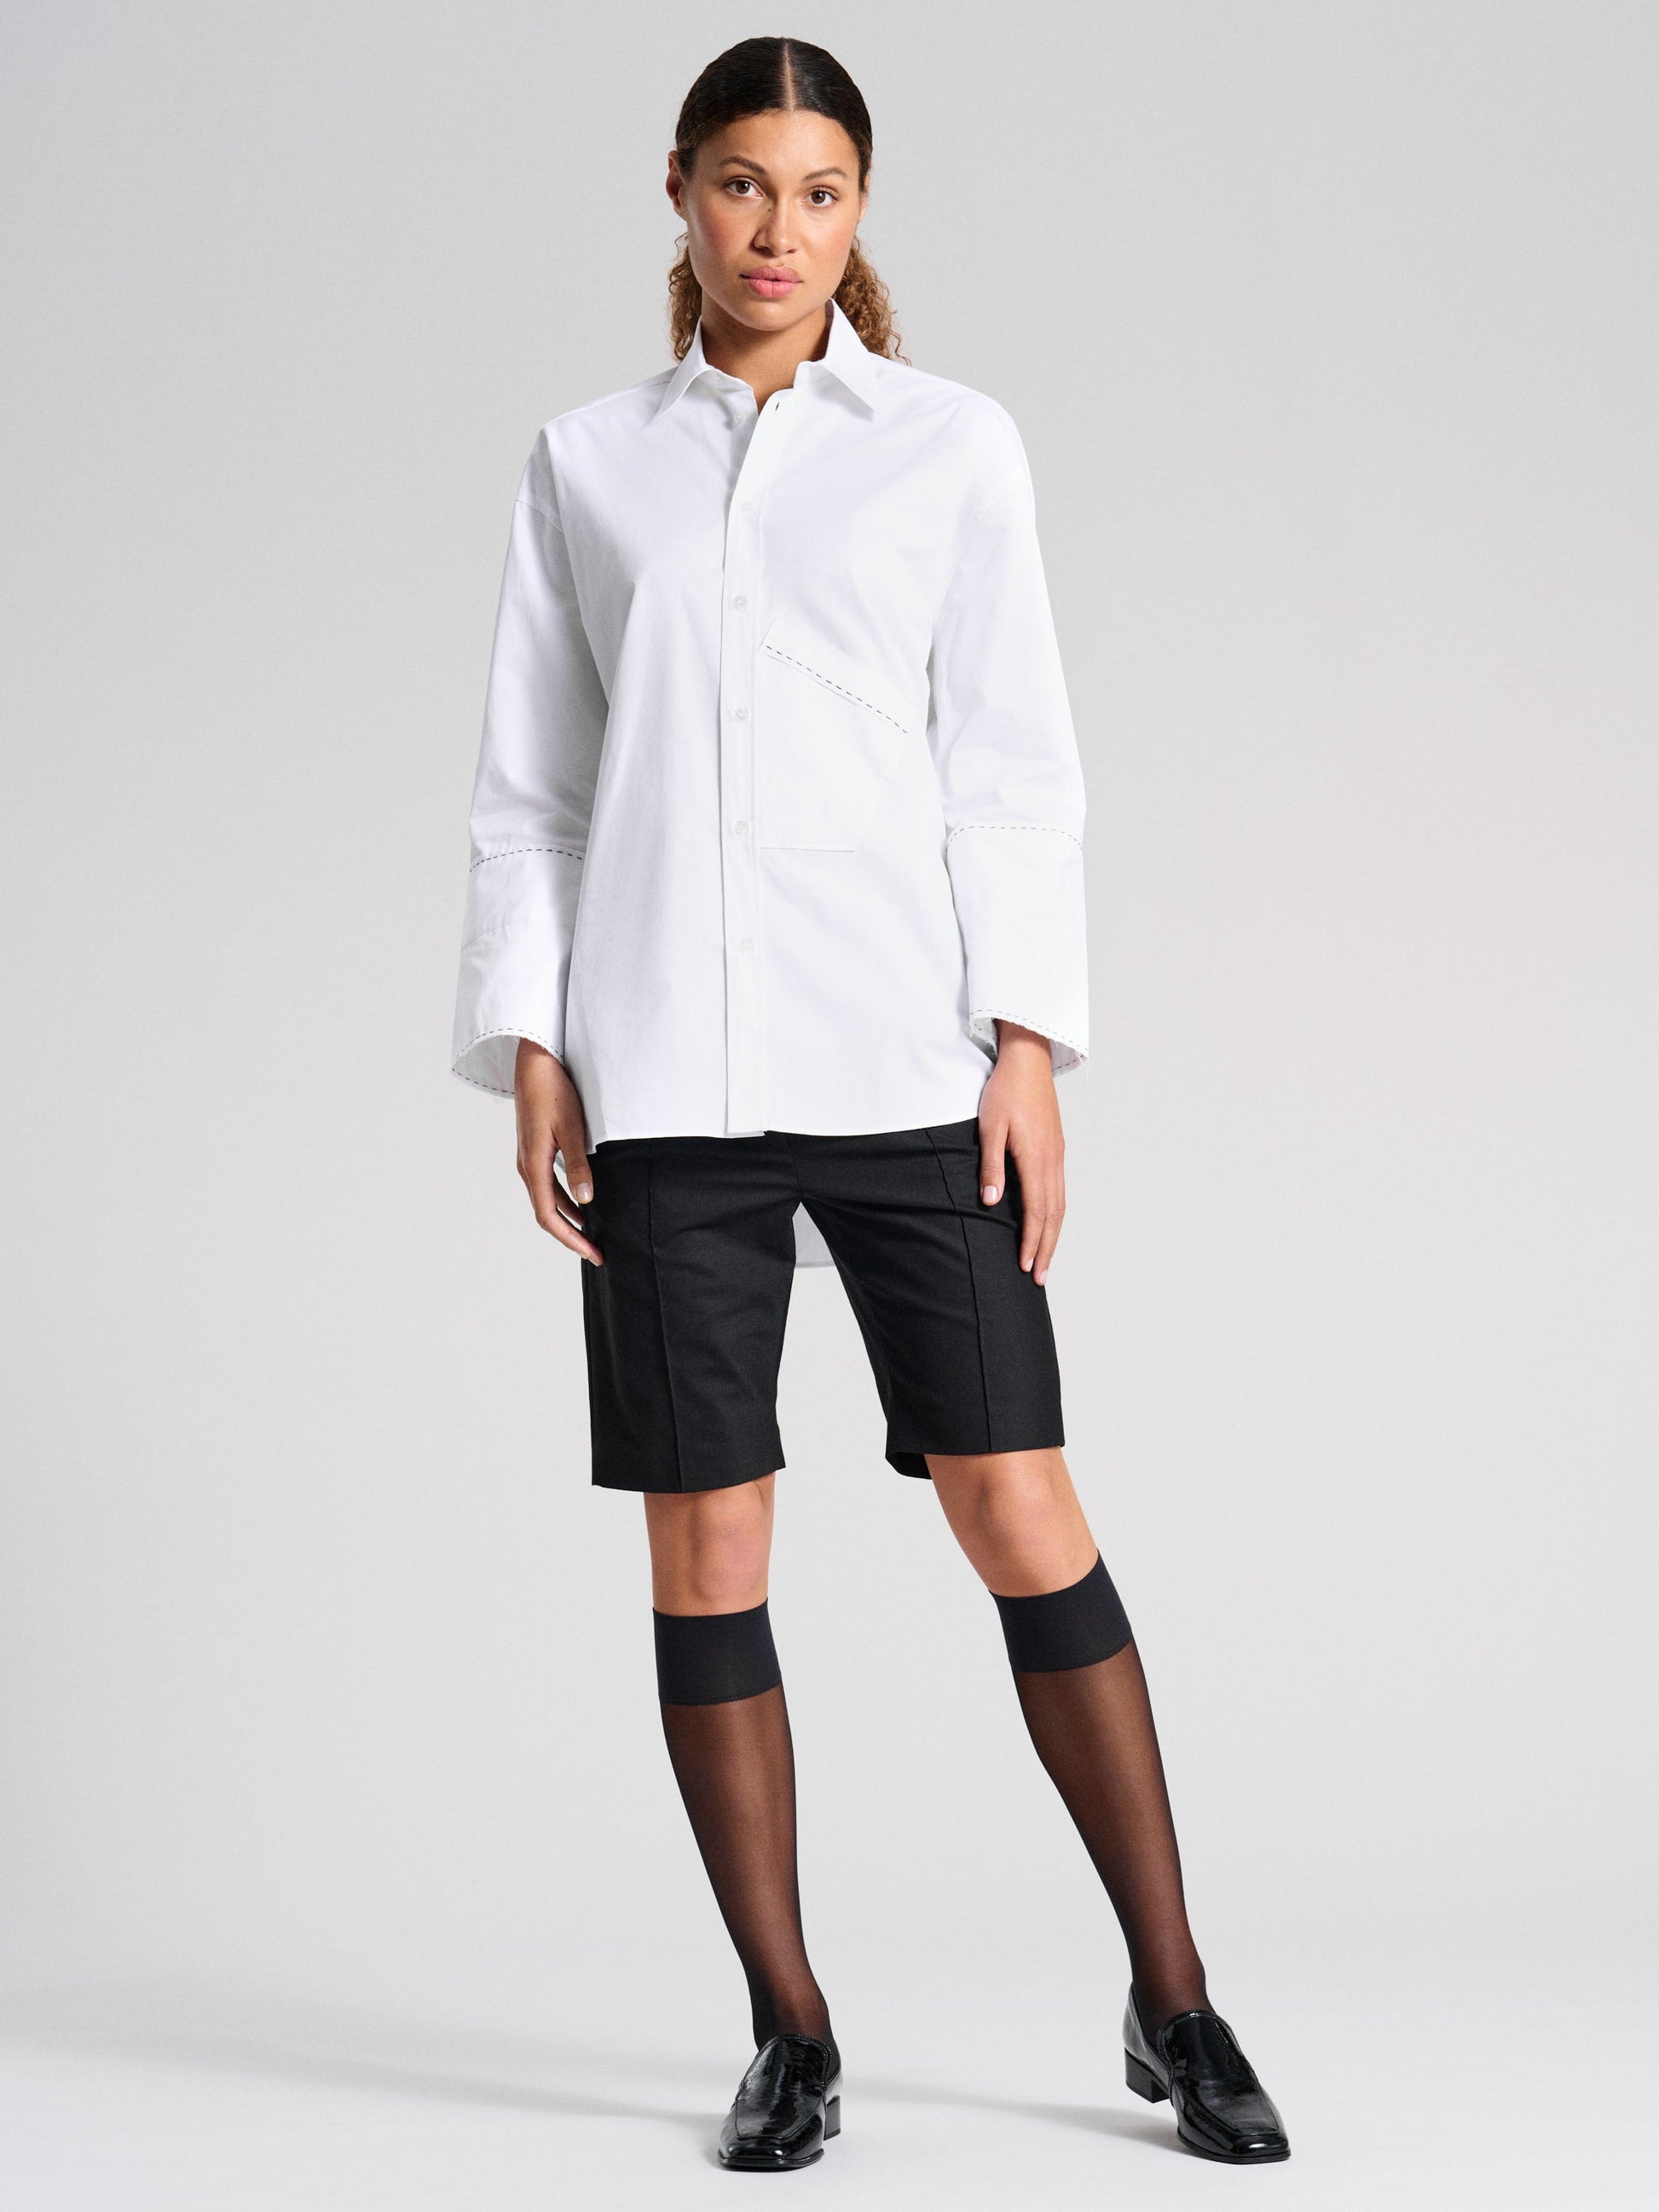 Chic office look with model wearing black knee-high socks paired with a crisp white shirt, Bermuda shorts, and classic black loafers.